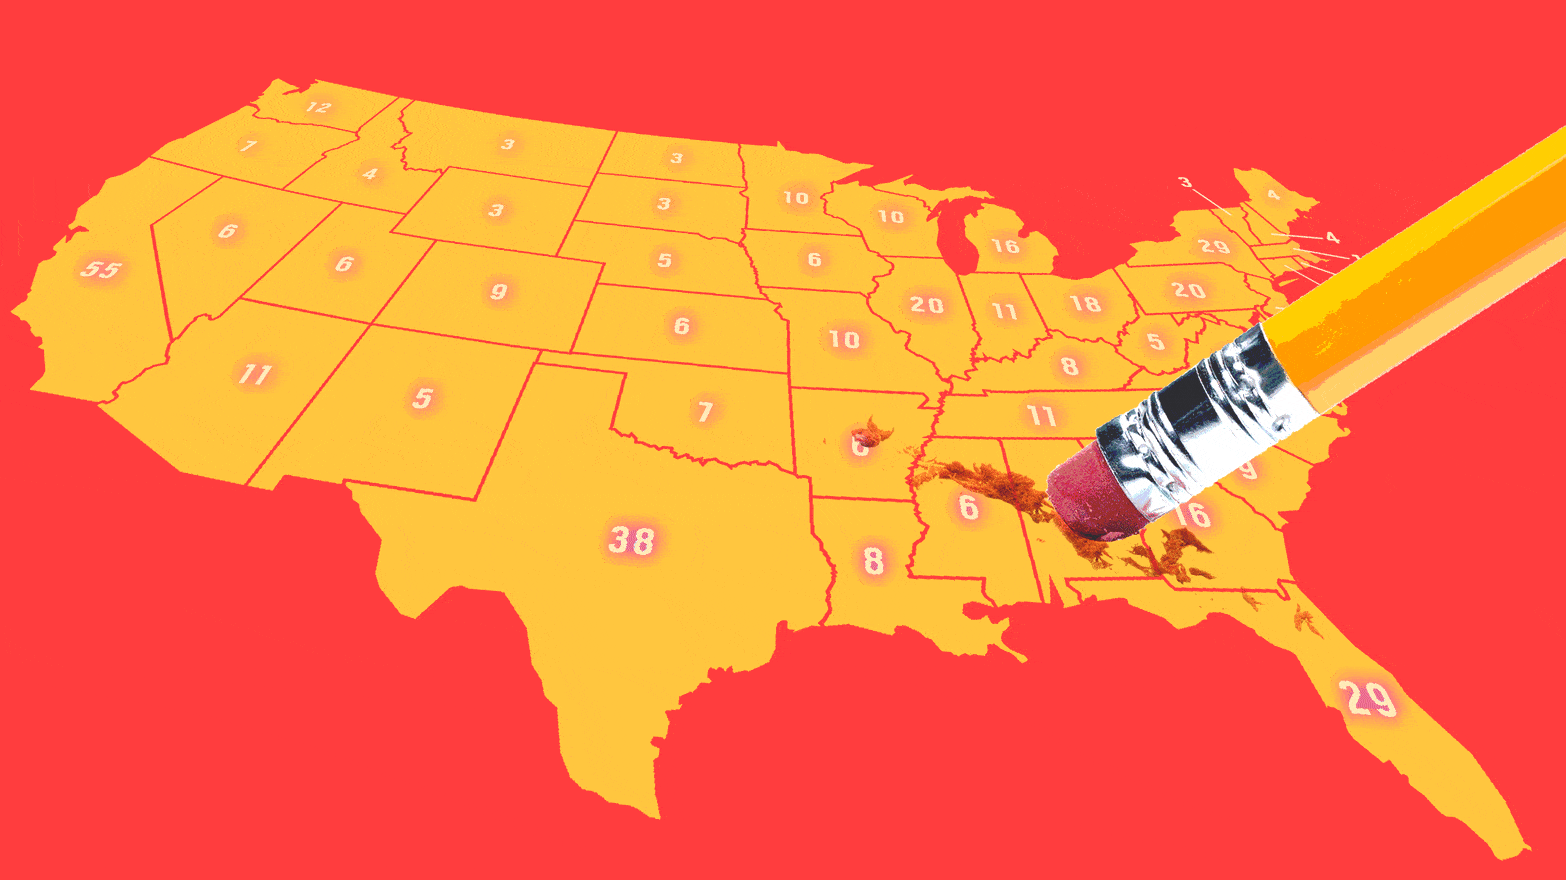 The founders created the Electoral College, but the states made it winner-take-all.